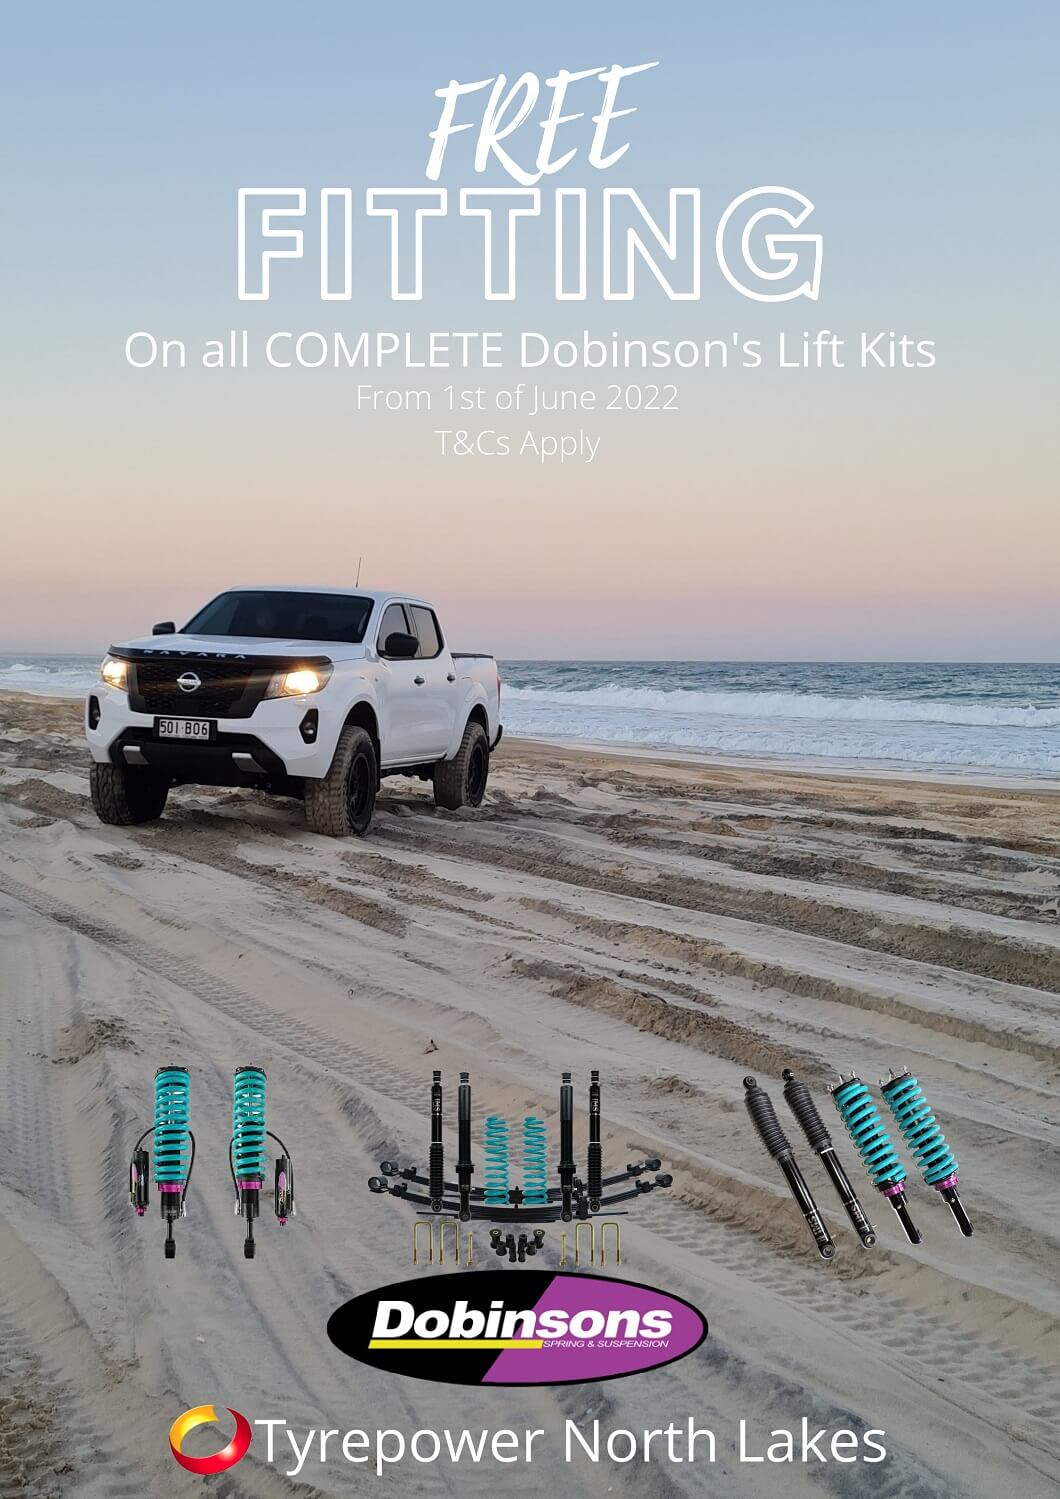 Free Fitting on all complete Dobinson's lift kits from 1st of June 2022